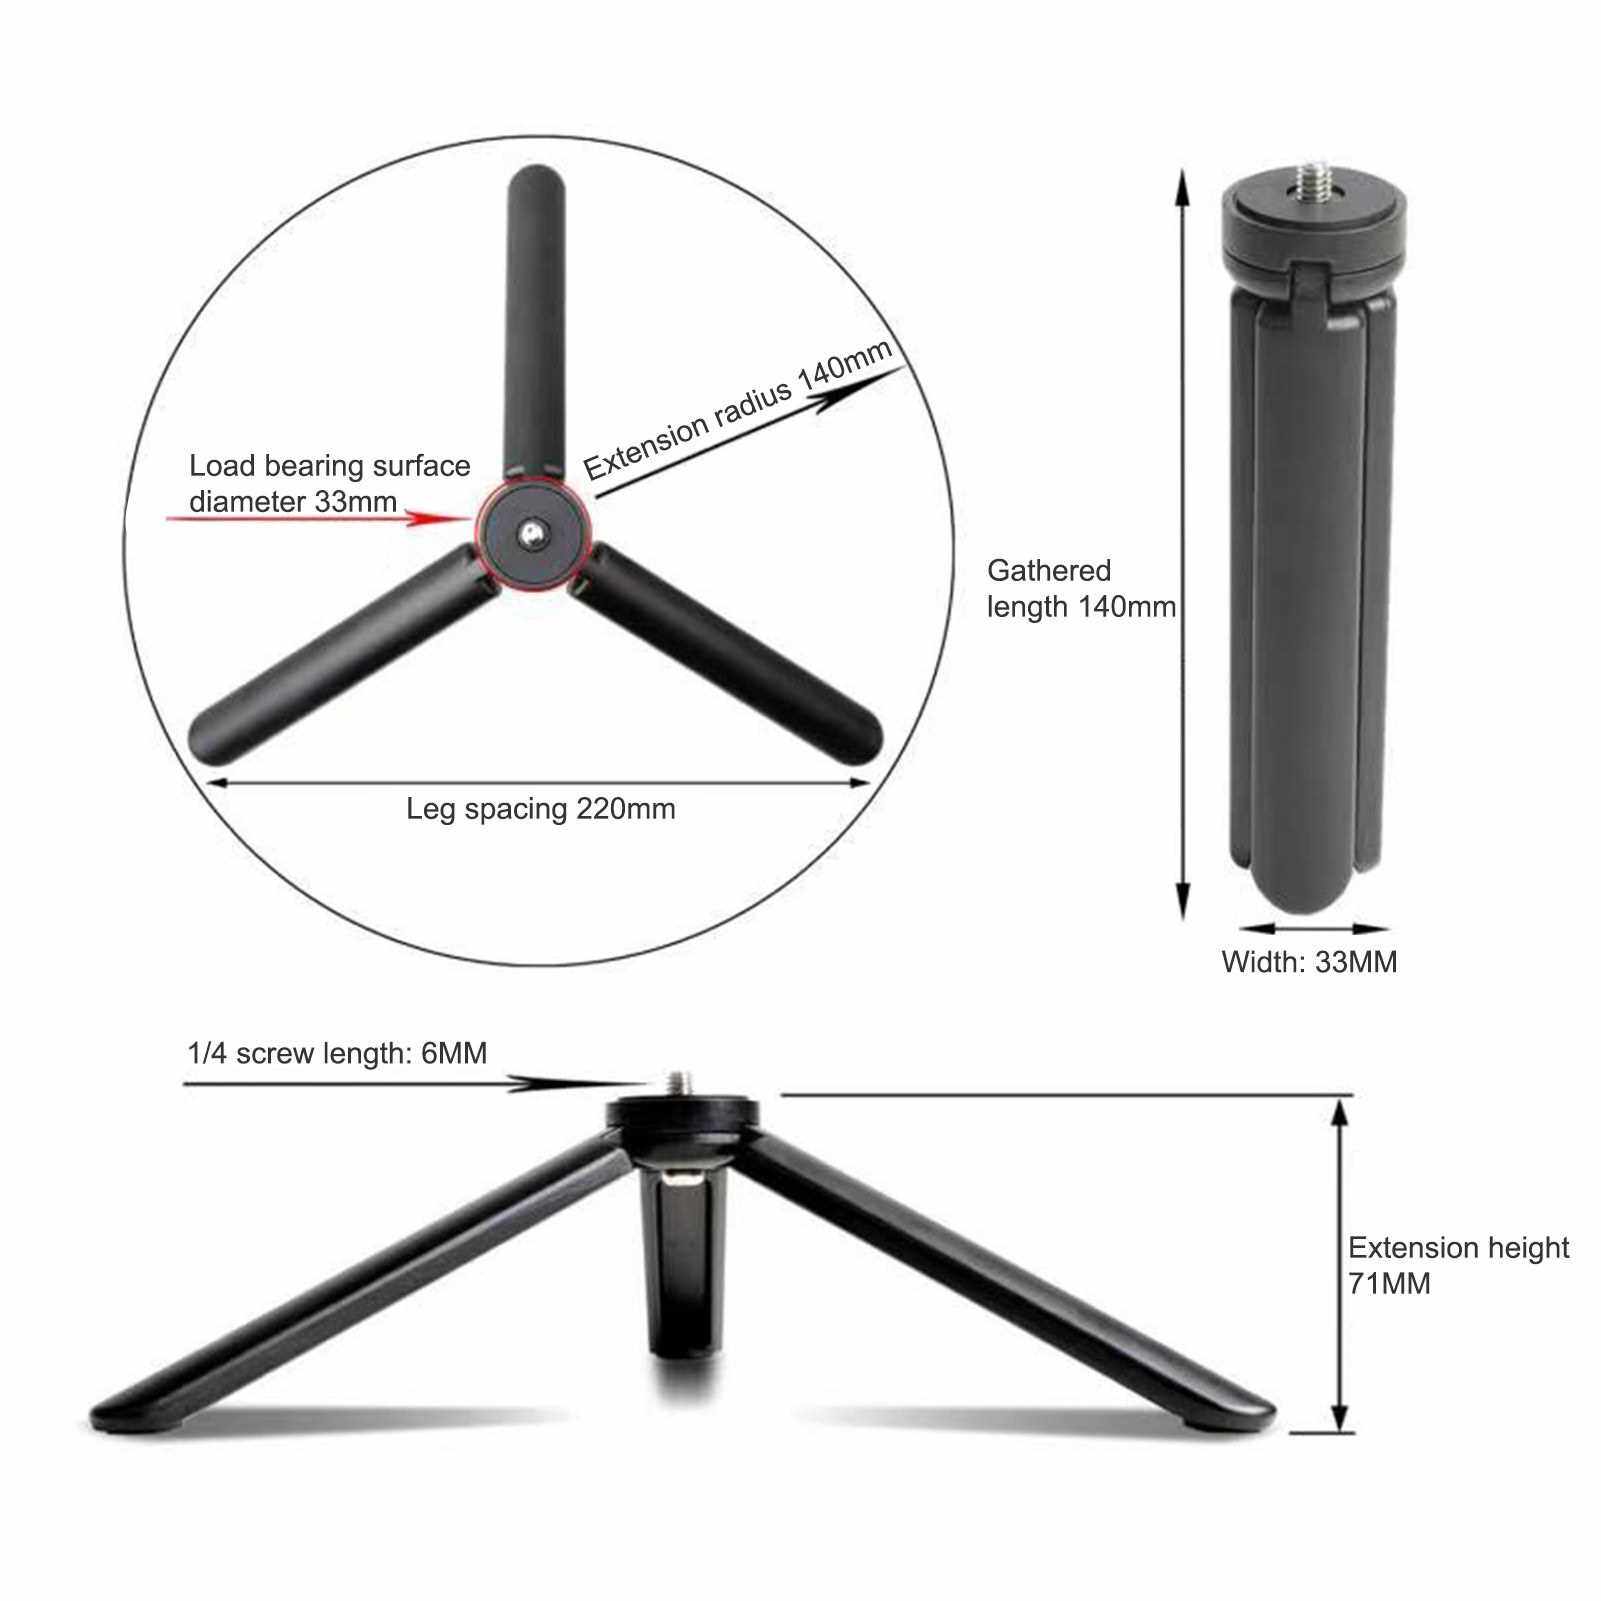 Stand Set Smart Speaker with Screen Replacement for Echo Show 5, Flexible Tripod Adjustable Stand Holder - Replacement for Echo Show 5 Stand with Magnetic 360 Degree Rotatable Spherical Tripod for Kitchen, Bedroom, Office (Standard)